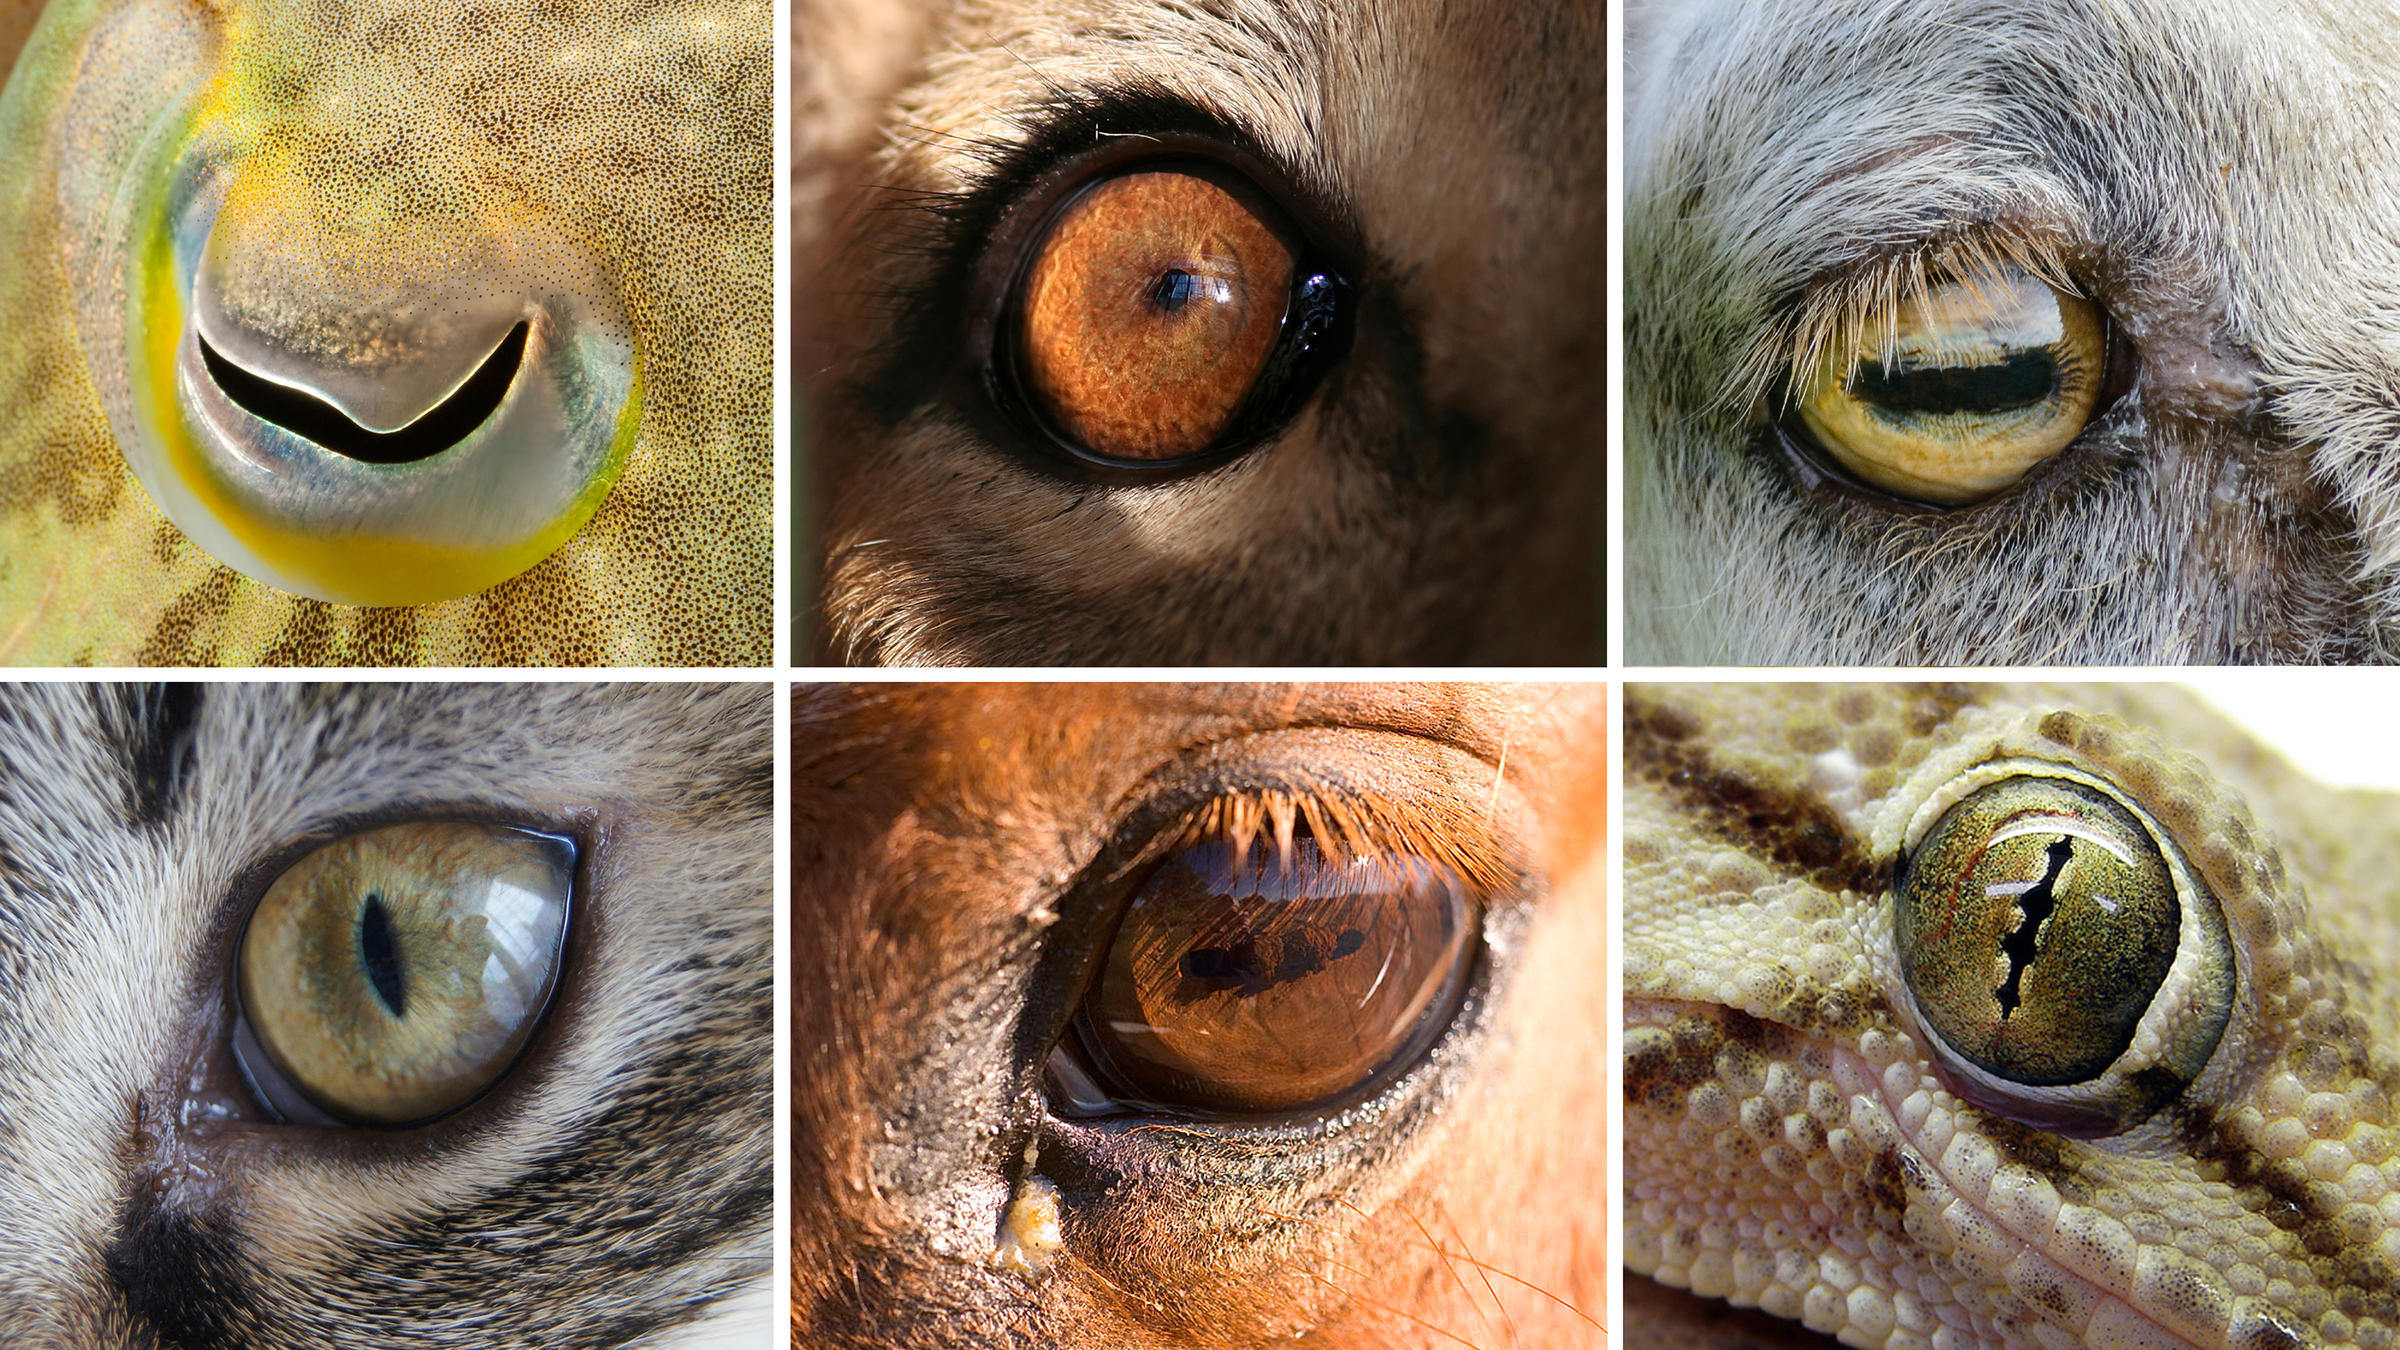 Can you guess which eyes belong to what animal? Top row, from left: cuttlefish, lion, goat. Bottom row, from left: domestic cat, horse, gecko.